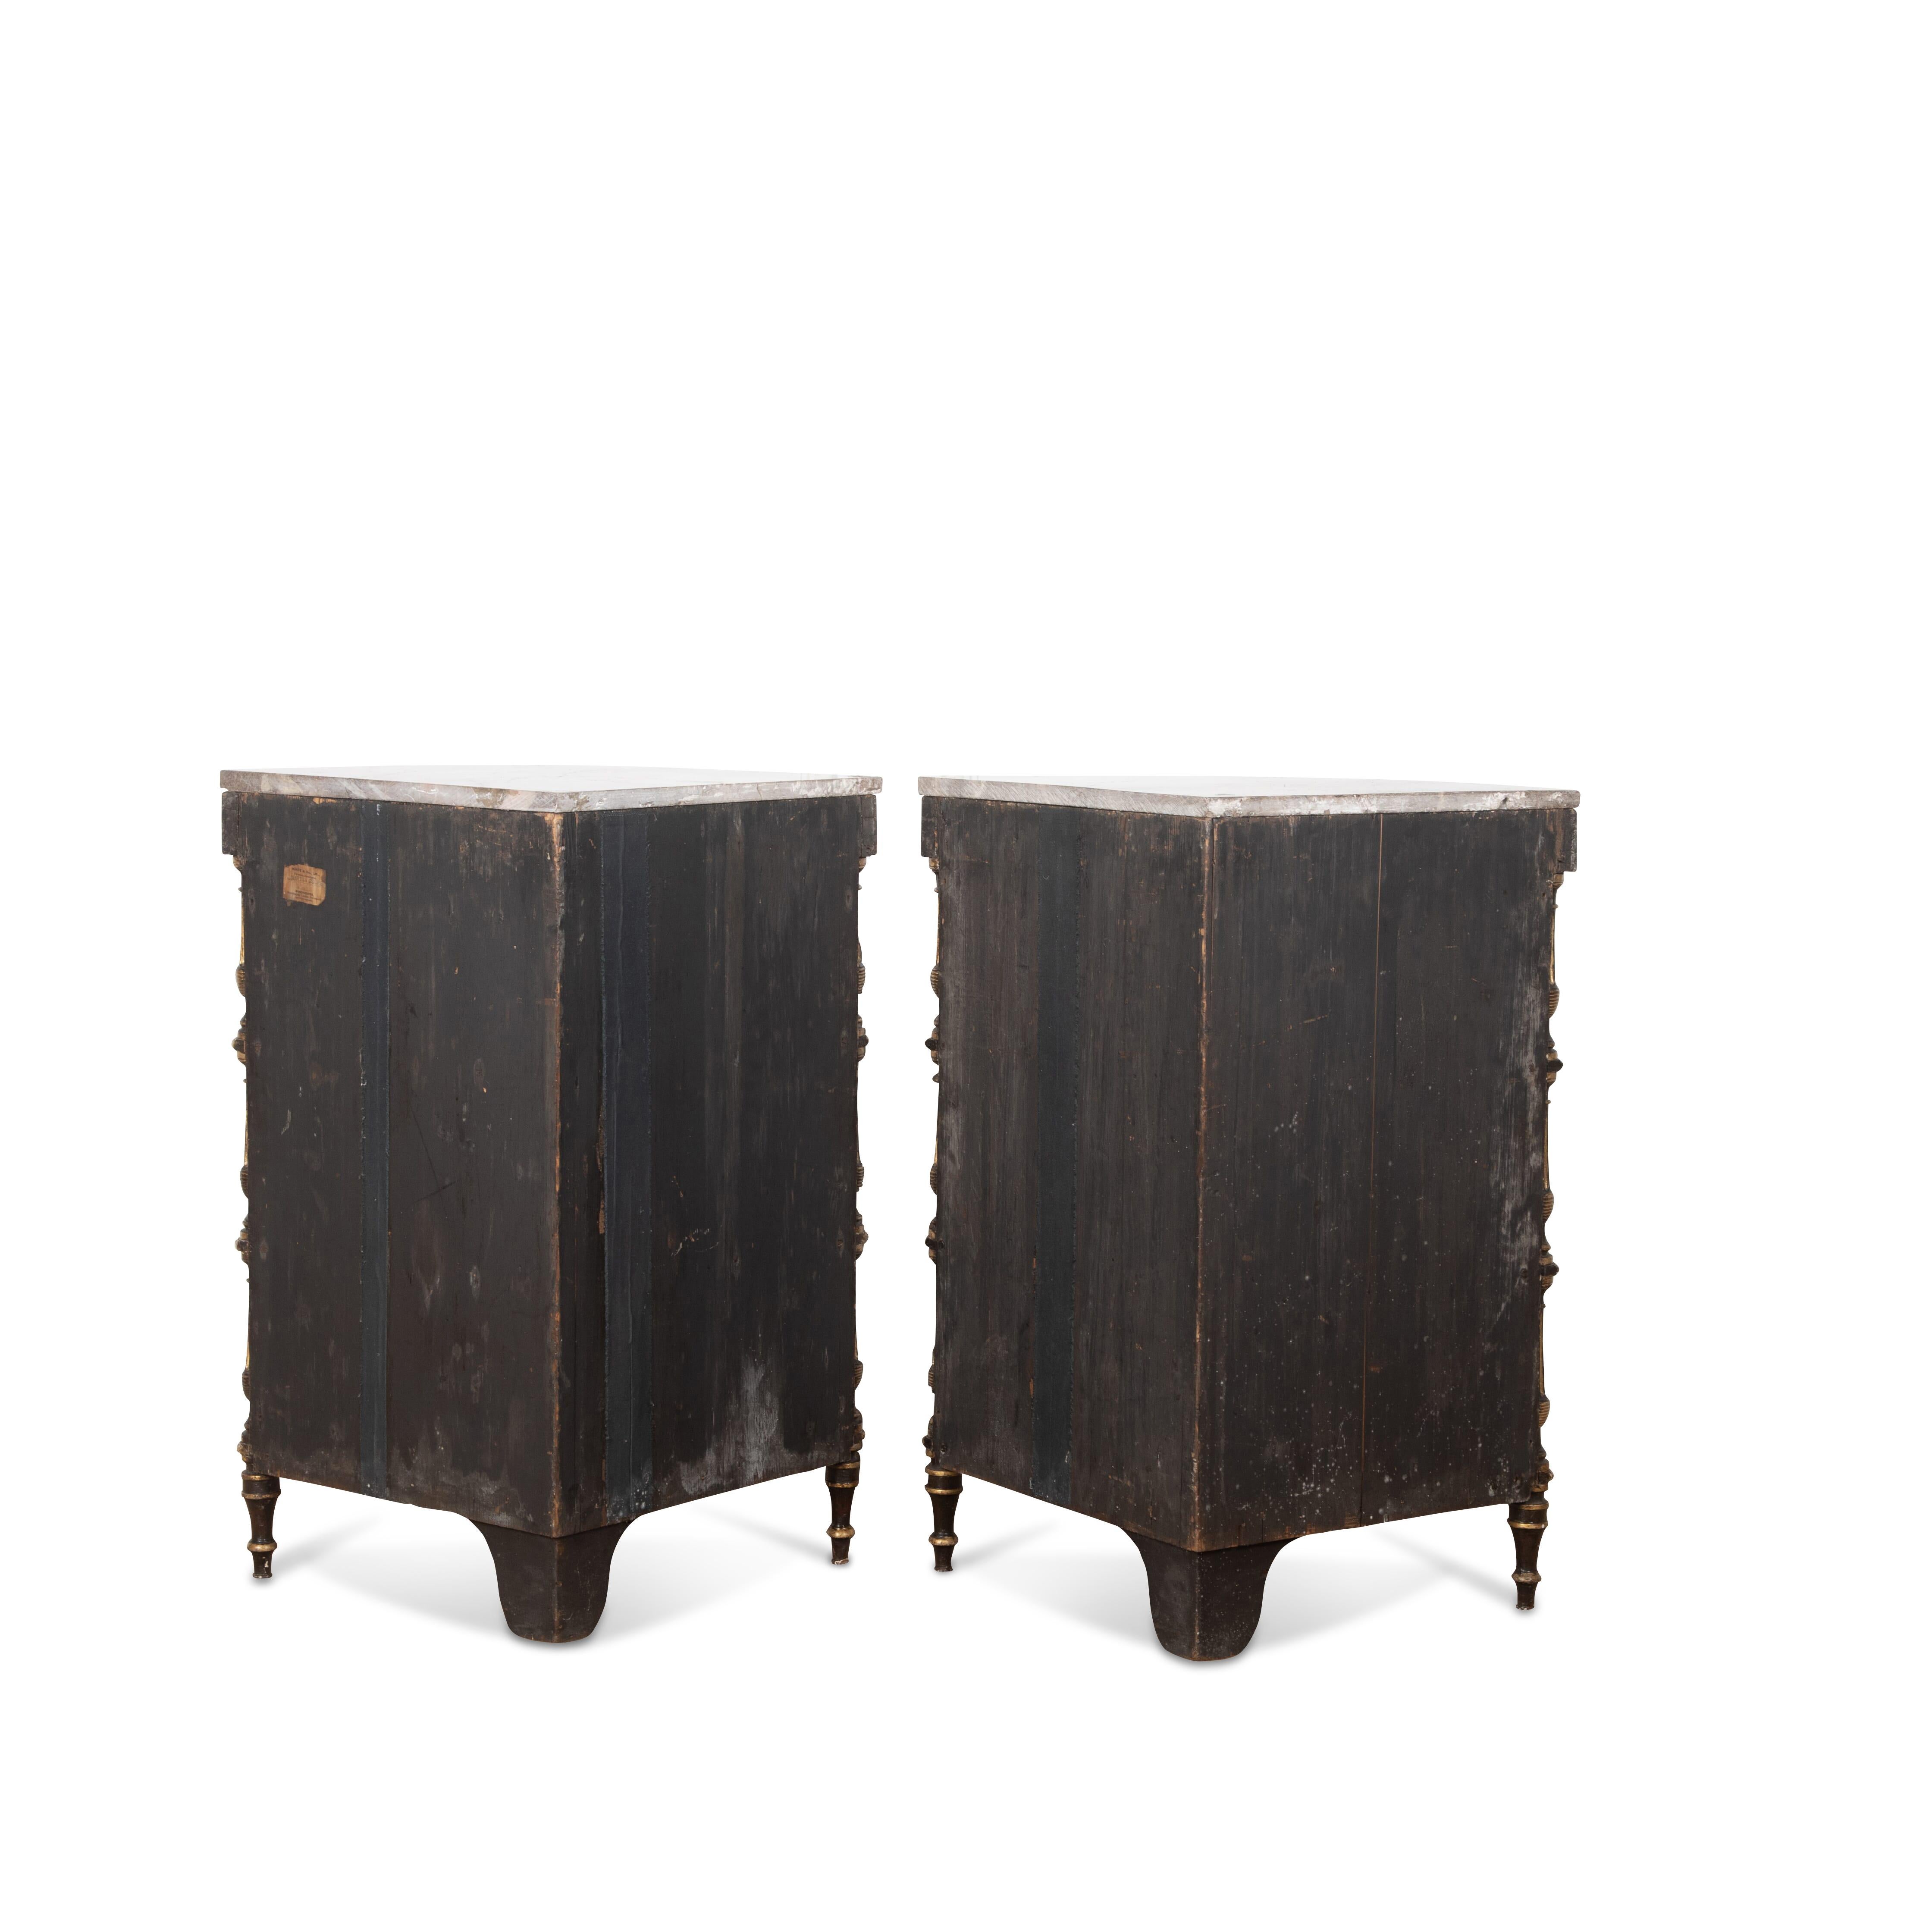 English Regency Pair of Decorated & Marble Top Corner Cabinets For Sale